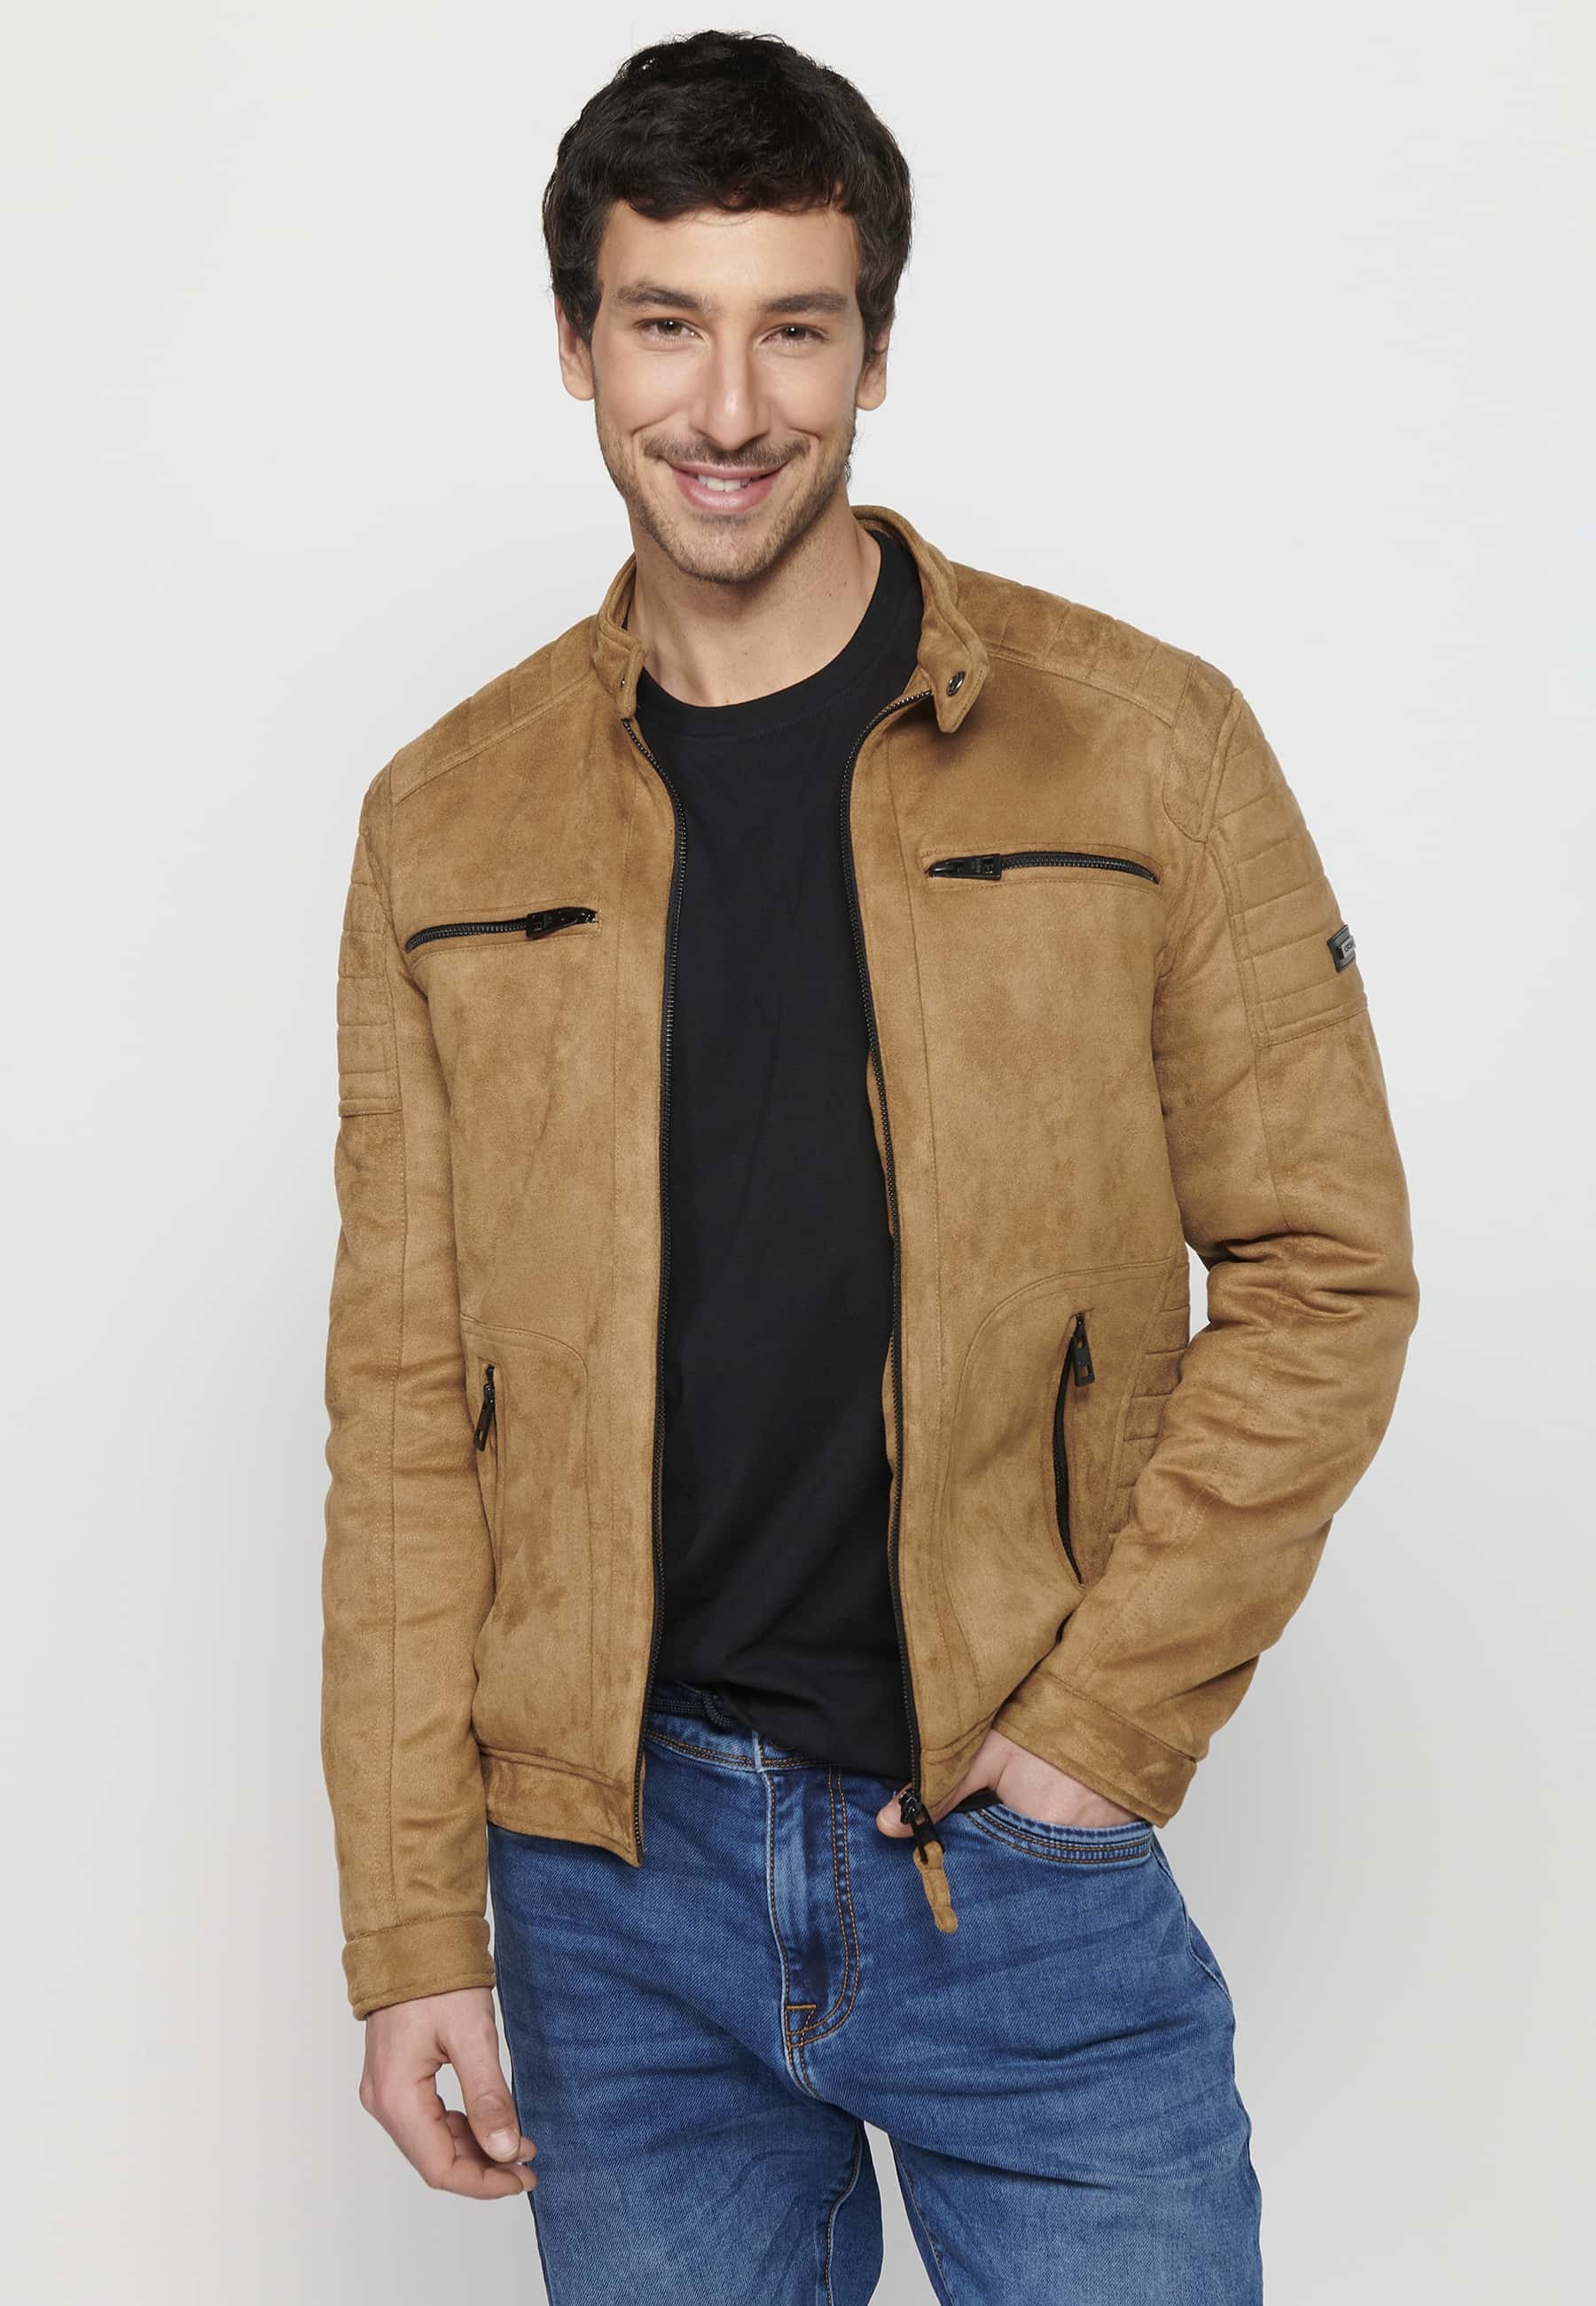 Men's Long Sleeve Jacket with Round Neck and Zipper Front Closure with Four Pockets in Tan Color 9